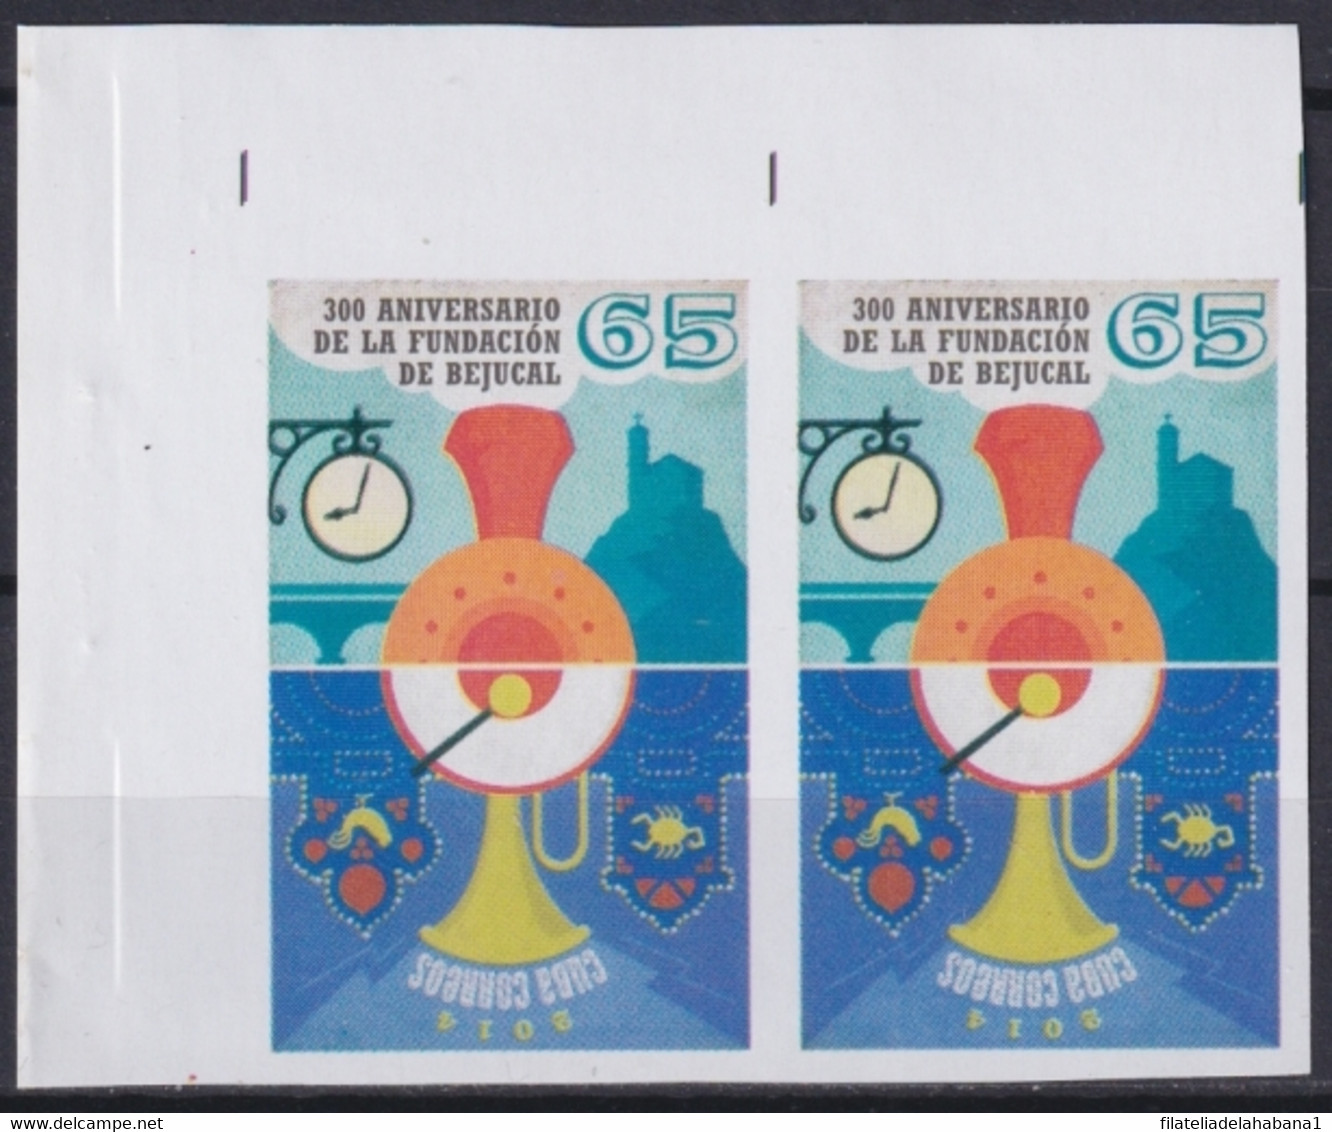 2014.431 CUBA MNH 2014 IMPERFORATED PROOF 300 ANIV BEJUCAL TOWN RAILRO - Imperforates, Proofs & Errors